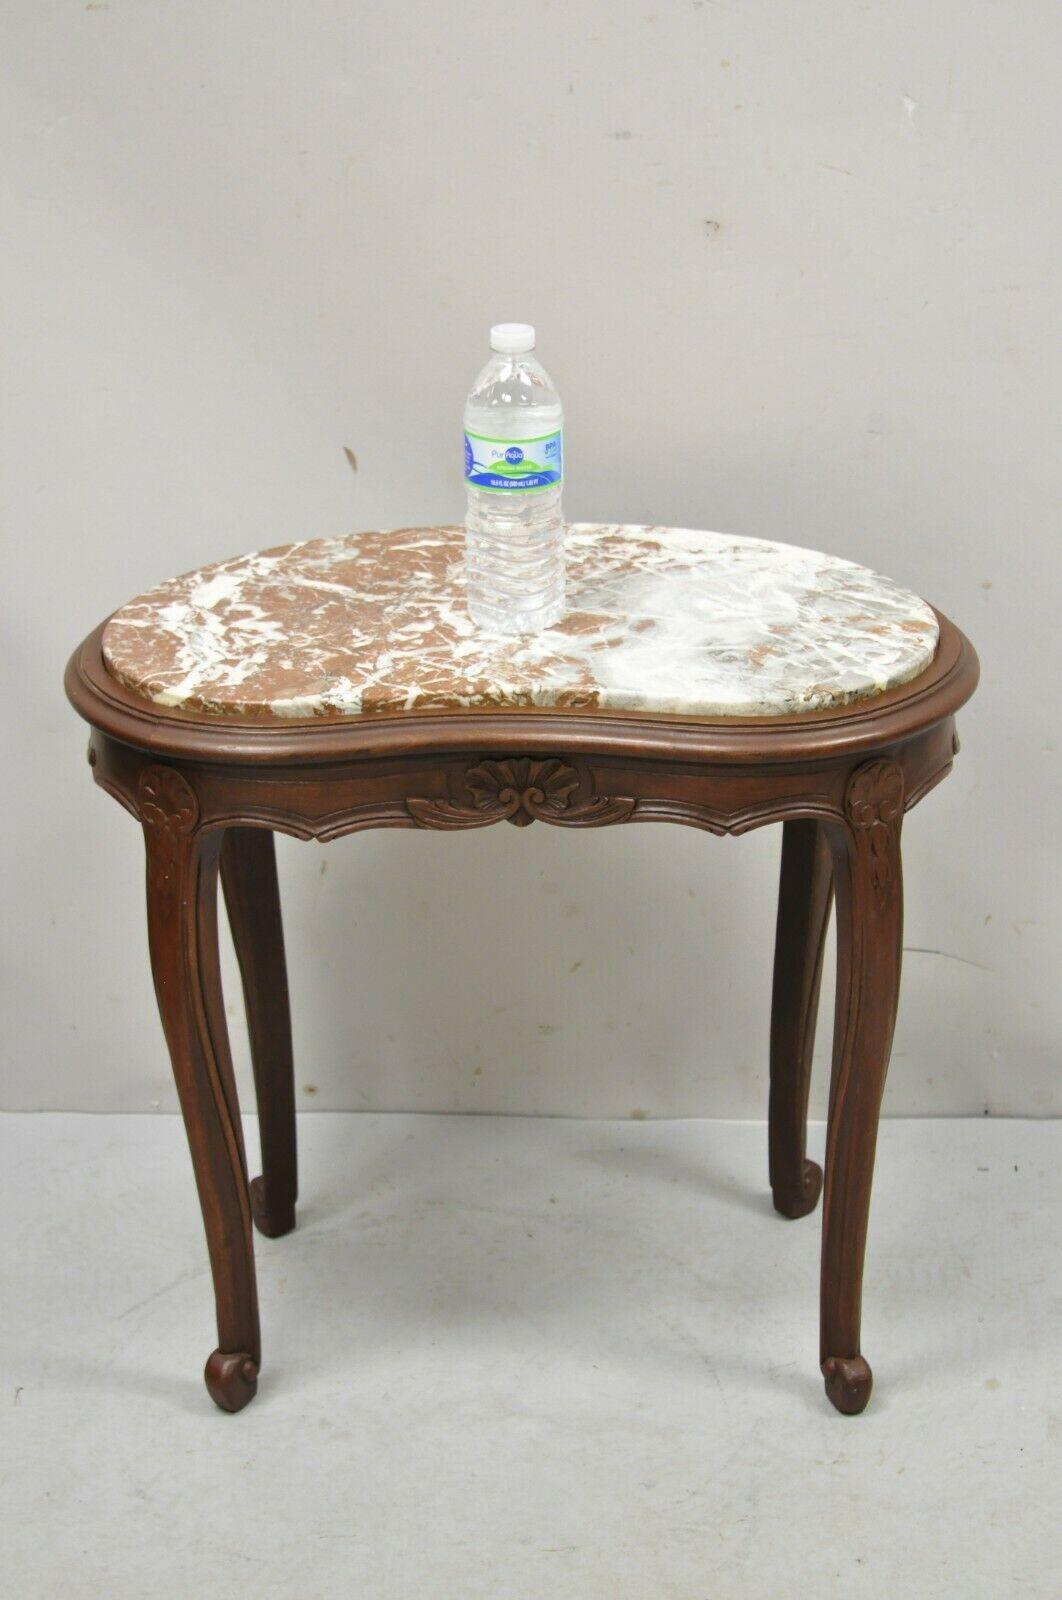 Antique French Louis XV style marble top kidney shaped small coffee table. Item features an inset kidney shaped marble top, solid wood frame, nicely carved details, original label, cabriole legs. Circa Early 1900s. Measurements: 21